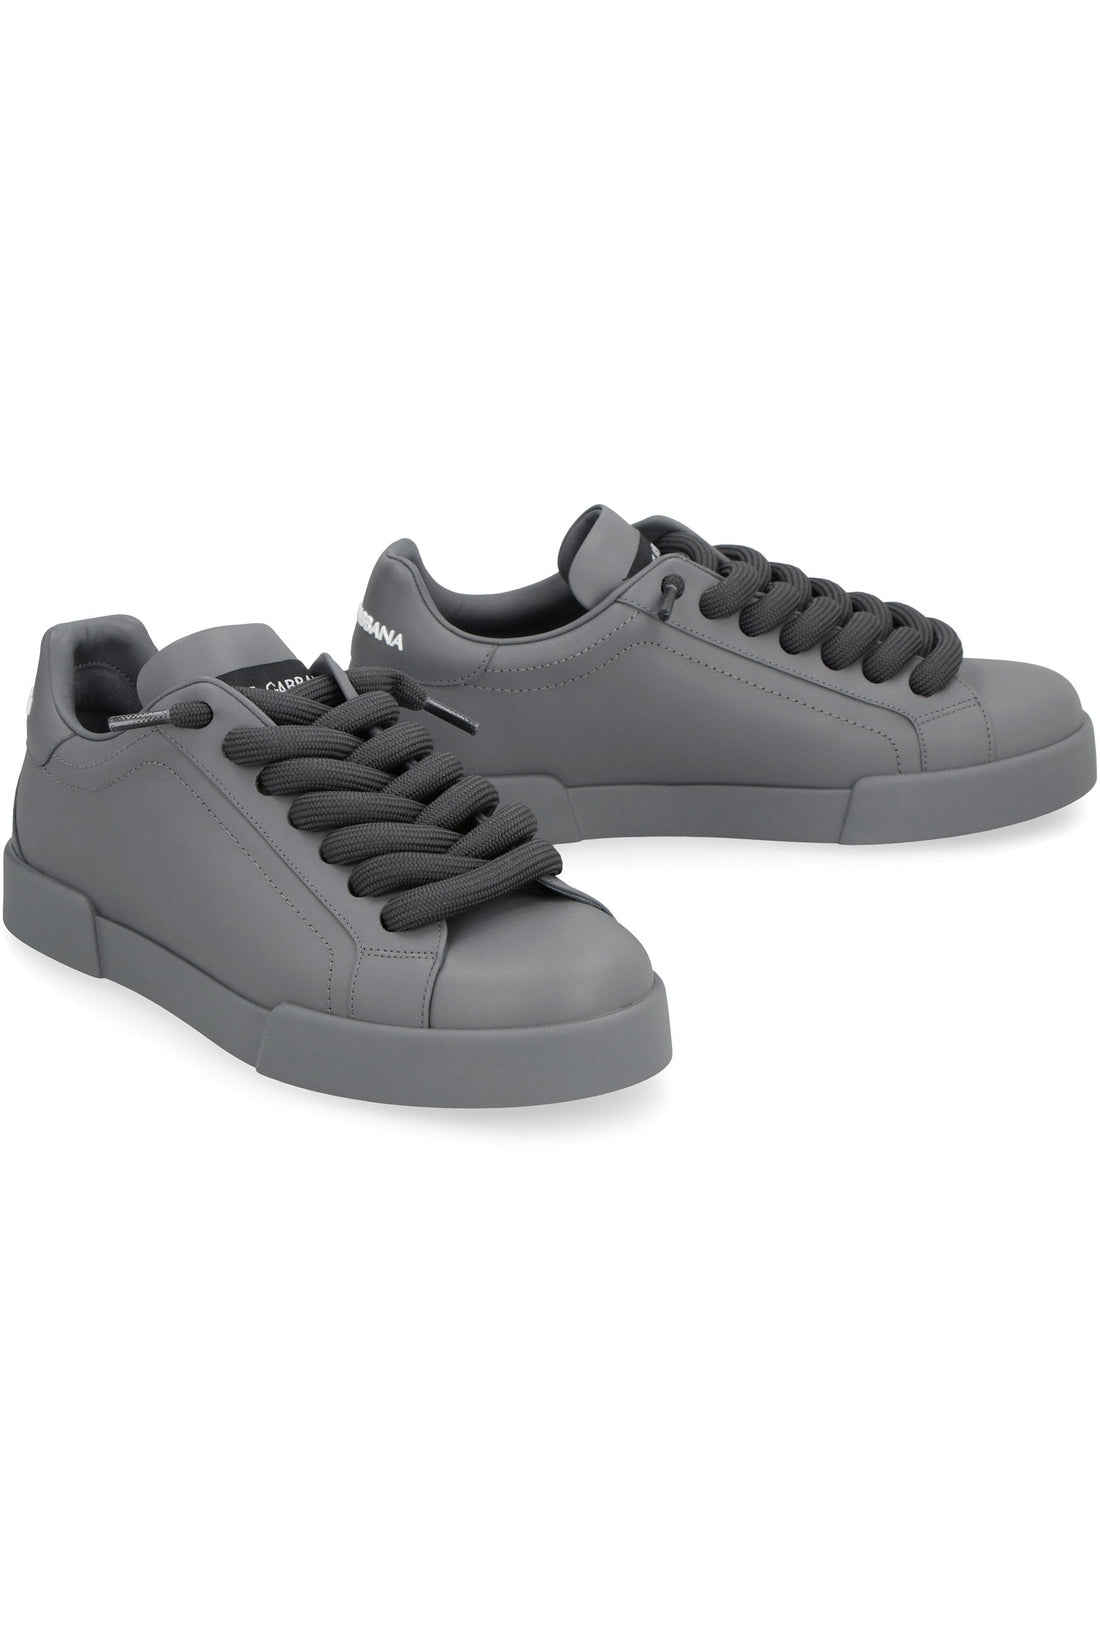 Dolce & Gabbana-OUTLET-SALE-Leather sneakers-ARCHIVIST